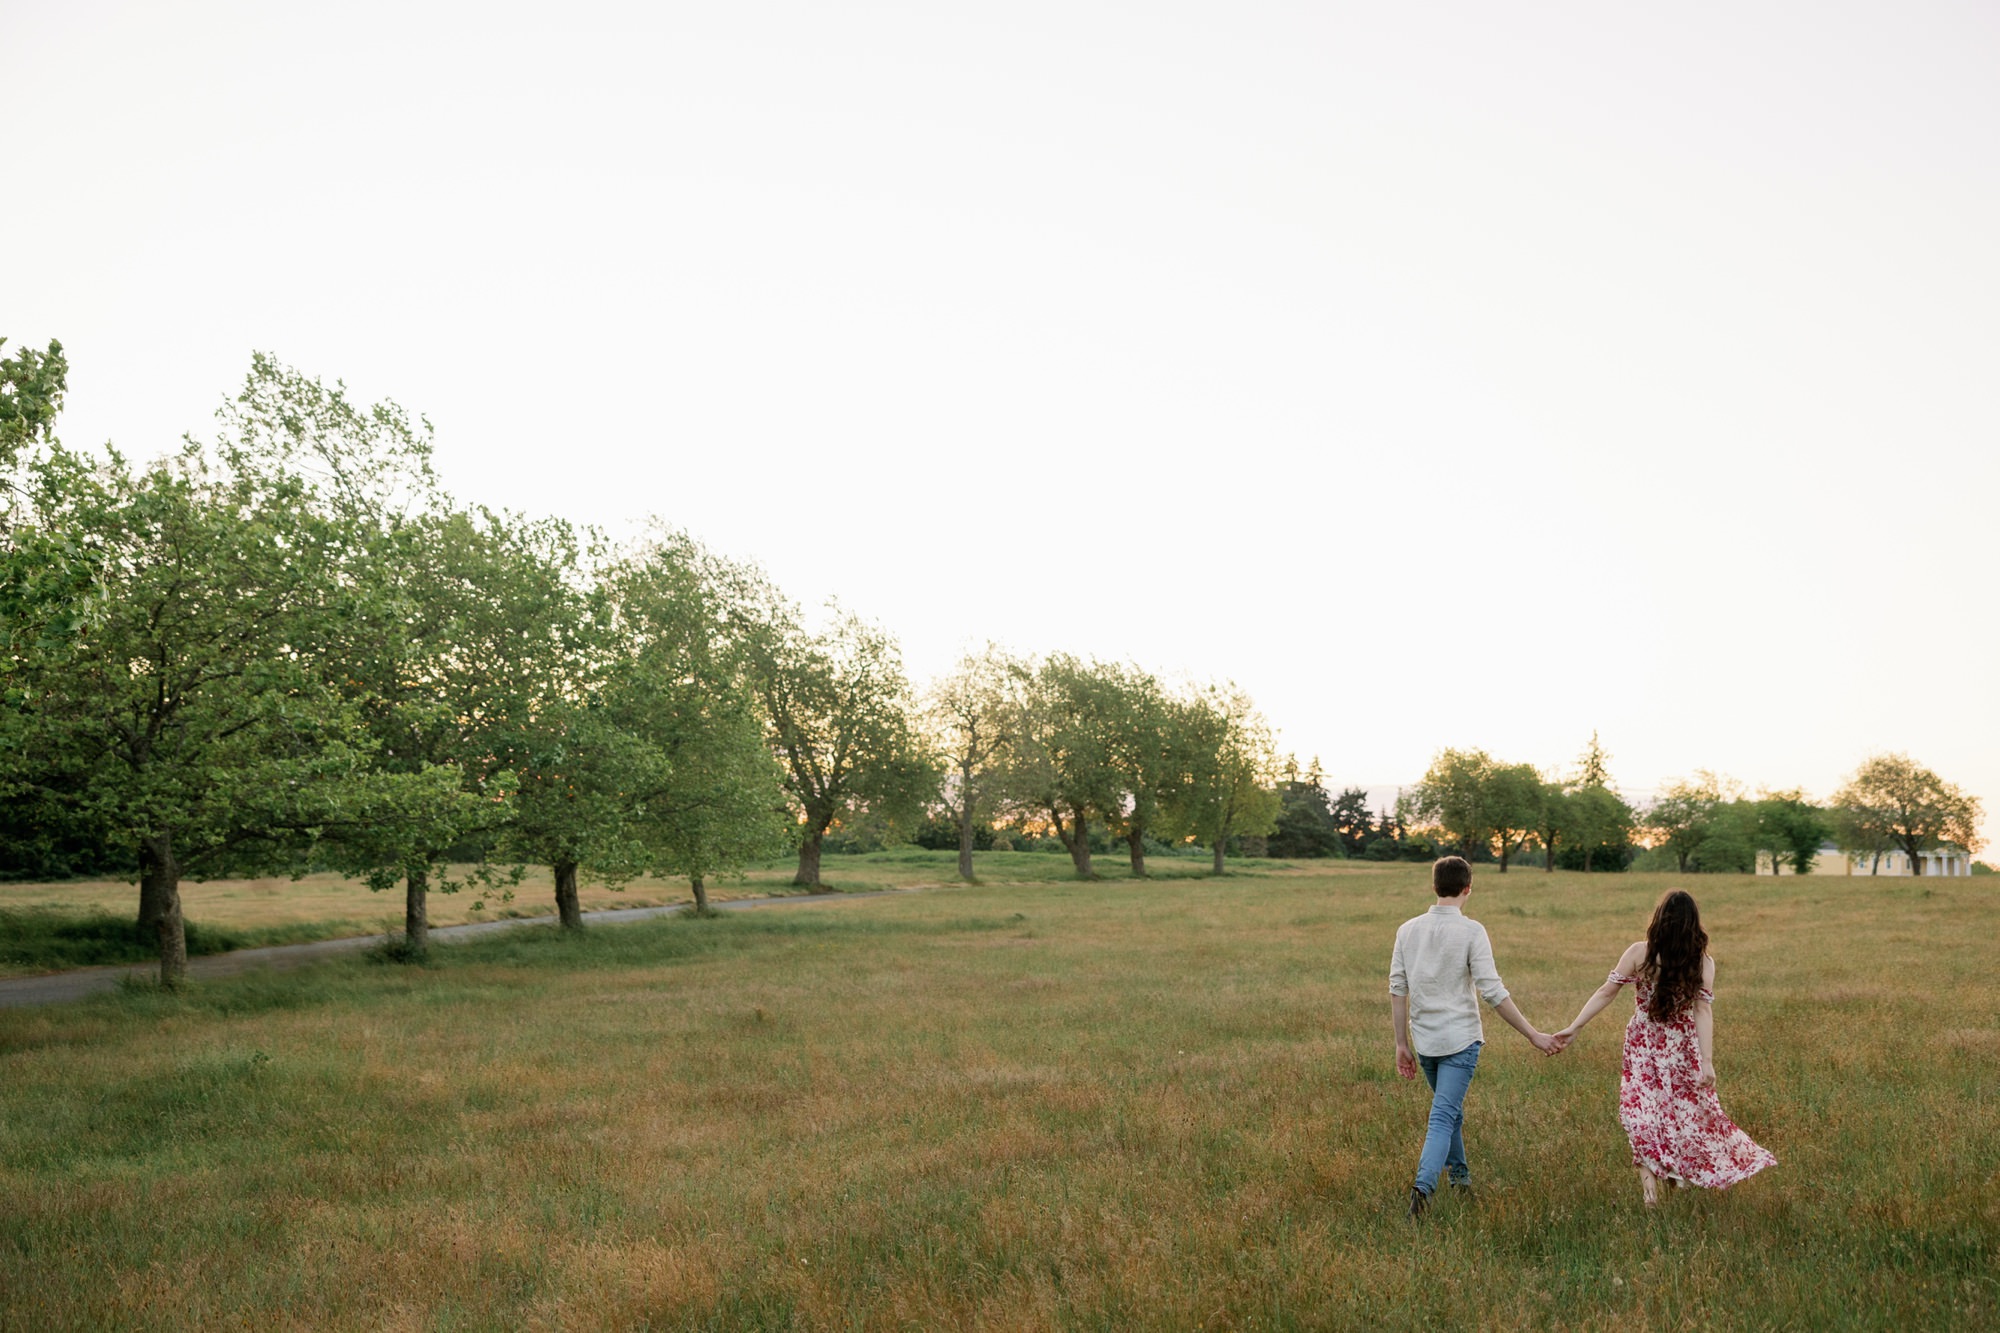 A couple holding hands and walking towards the sunset in a large open field, with the woman in a floral dress and the man in a light shirt.